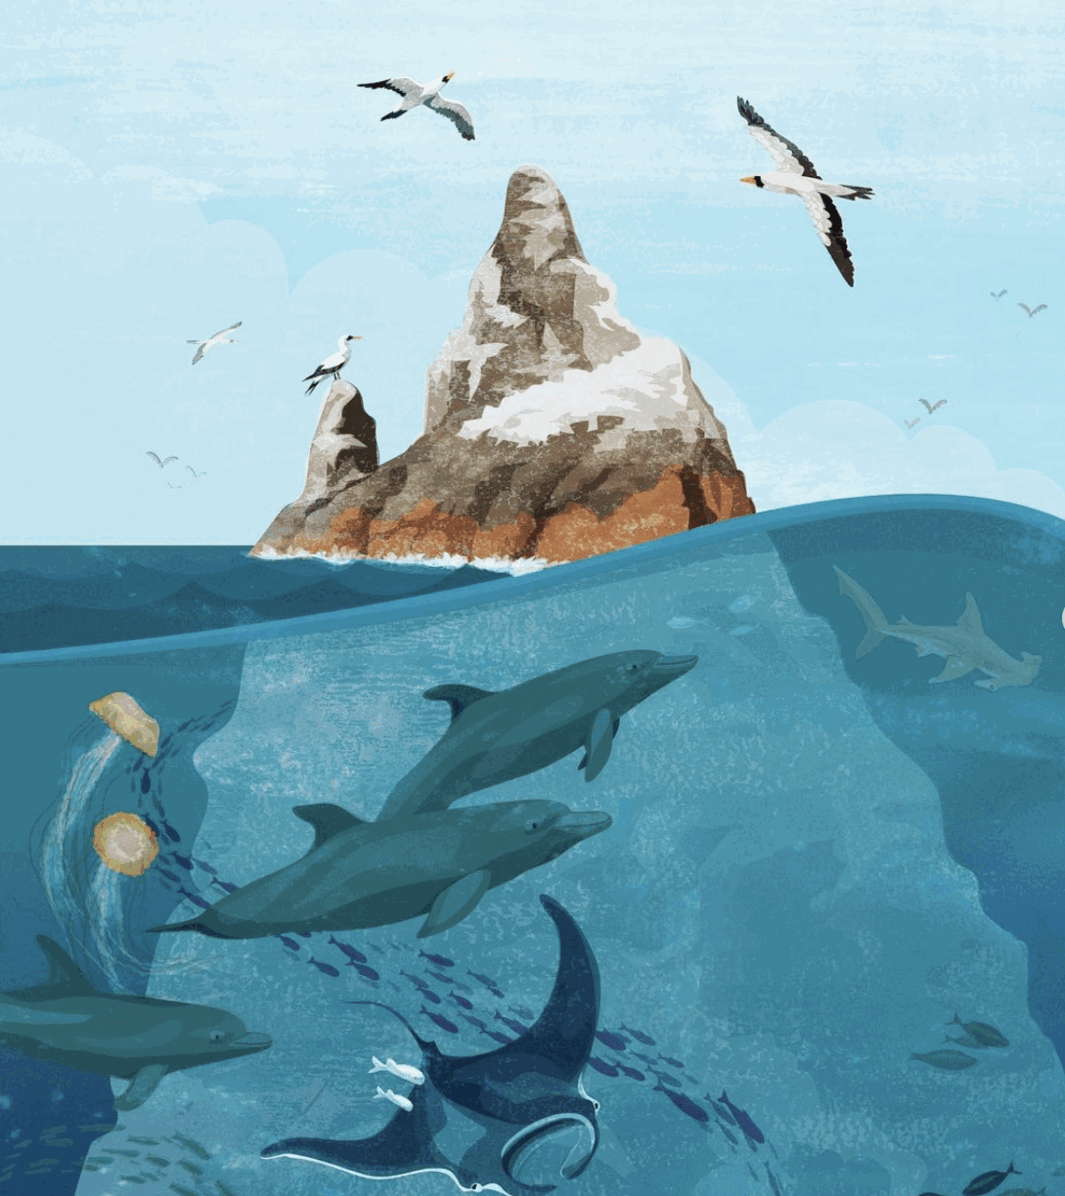 Kerry Hyndman, Sea life with Seagull and ocean creatures by Kerry Hyndman.